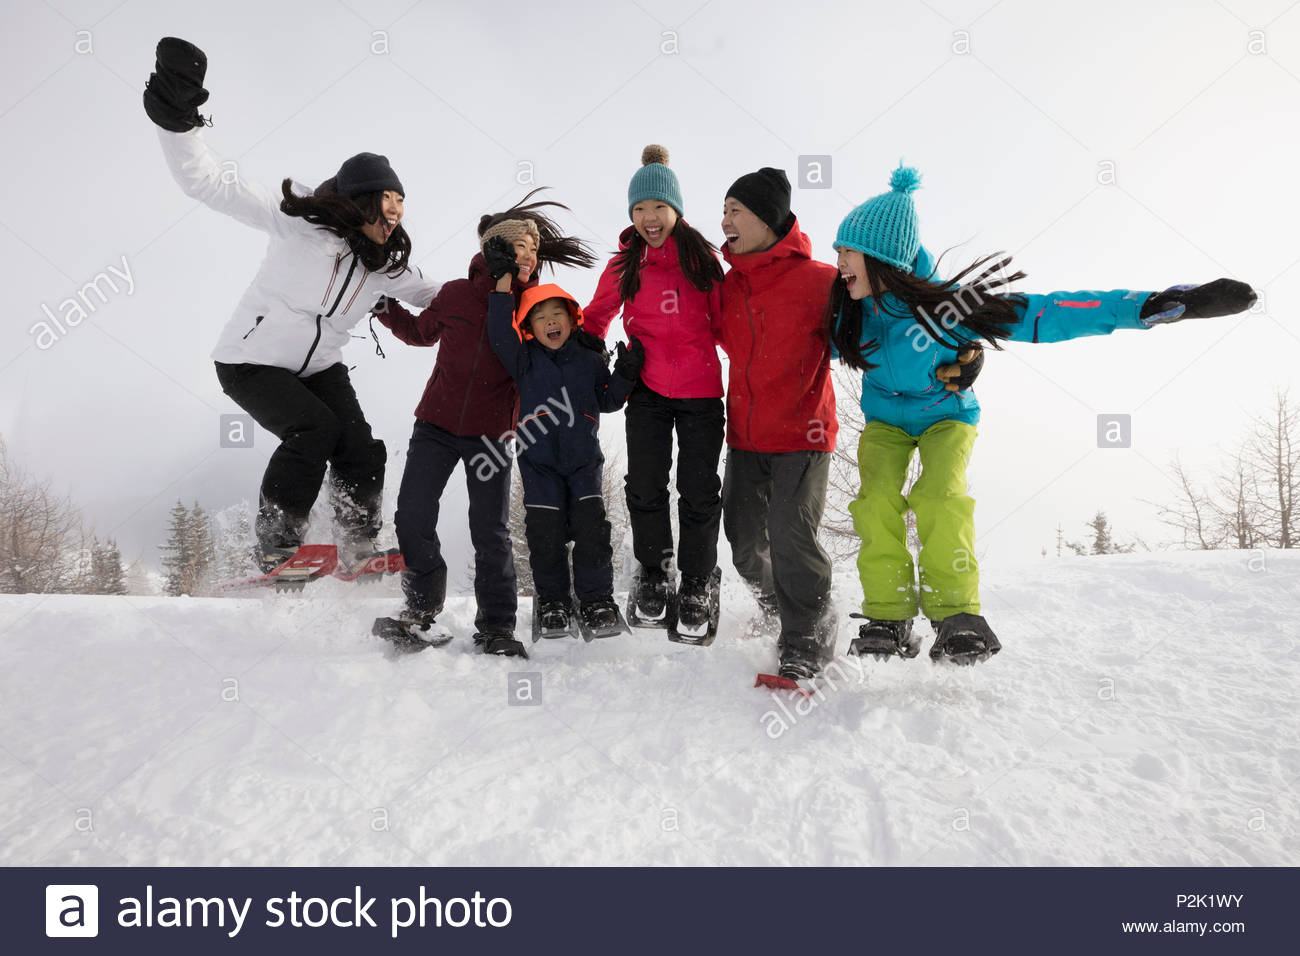 Playful, energetic family snowshoers jumping in snow Stock Photo